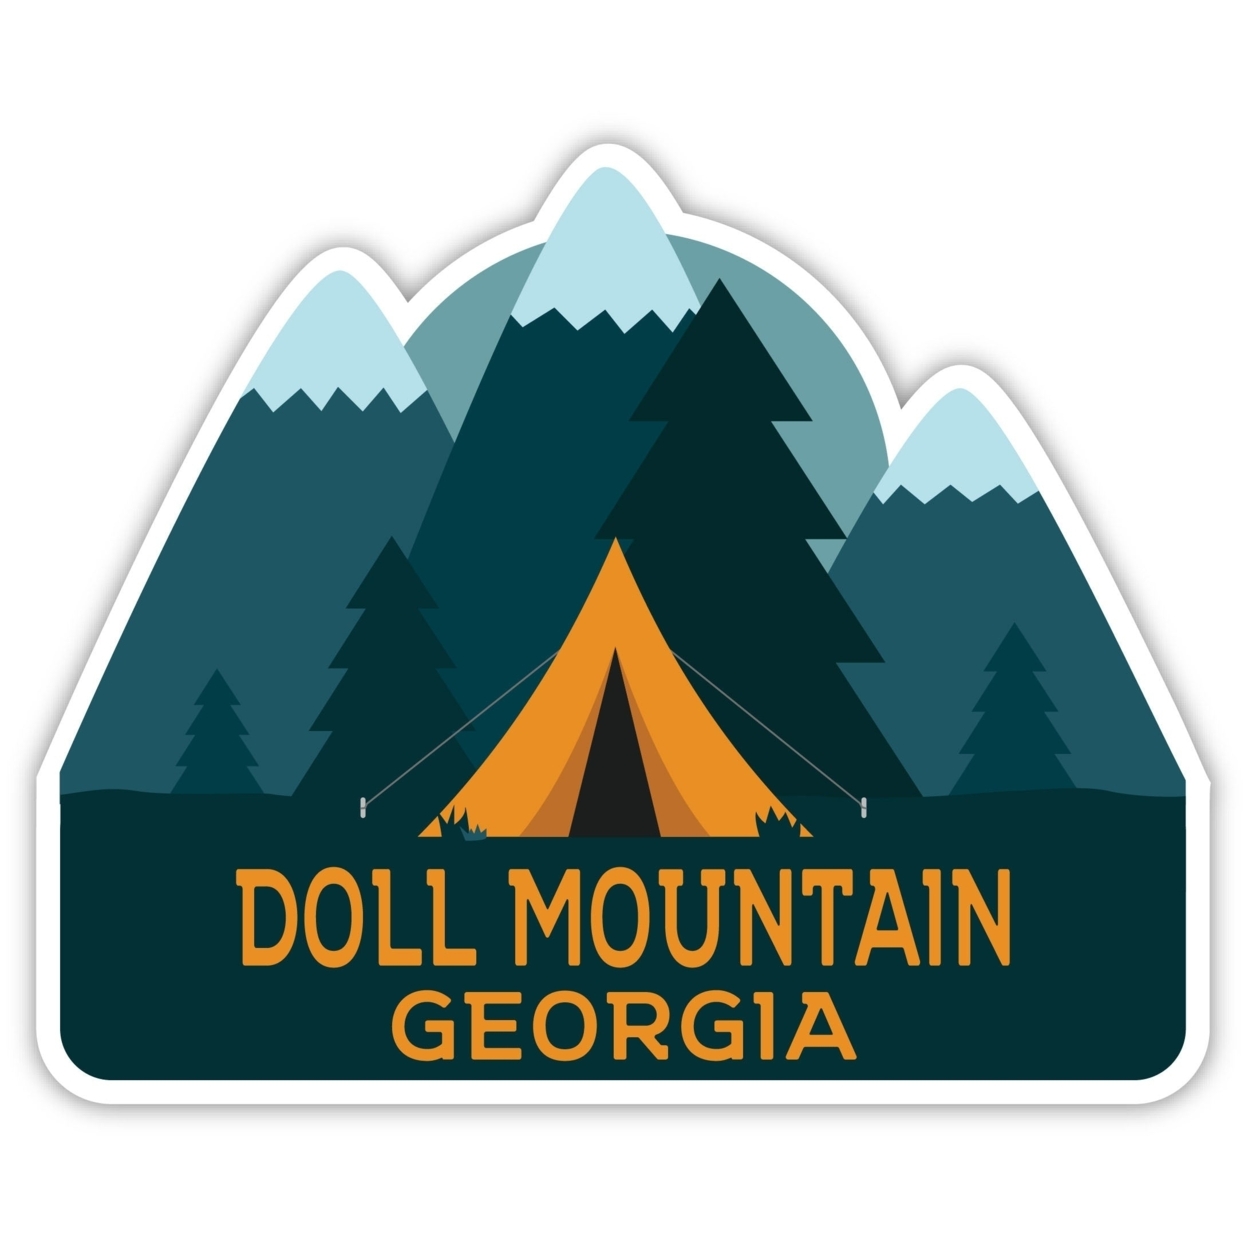 Doll Mountain Georgia Souvenir Decorative Stickers (Choose Theme And Size) - 4-Pack, 10-Inch, Tent